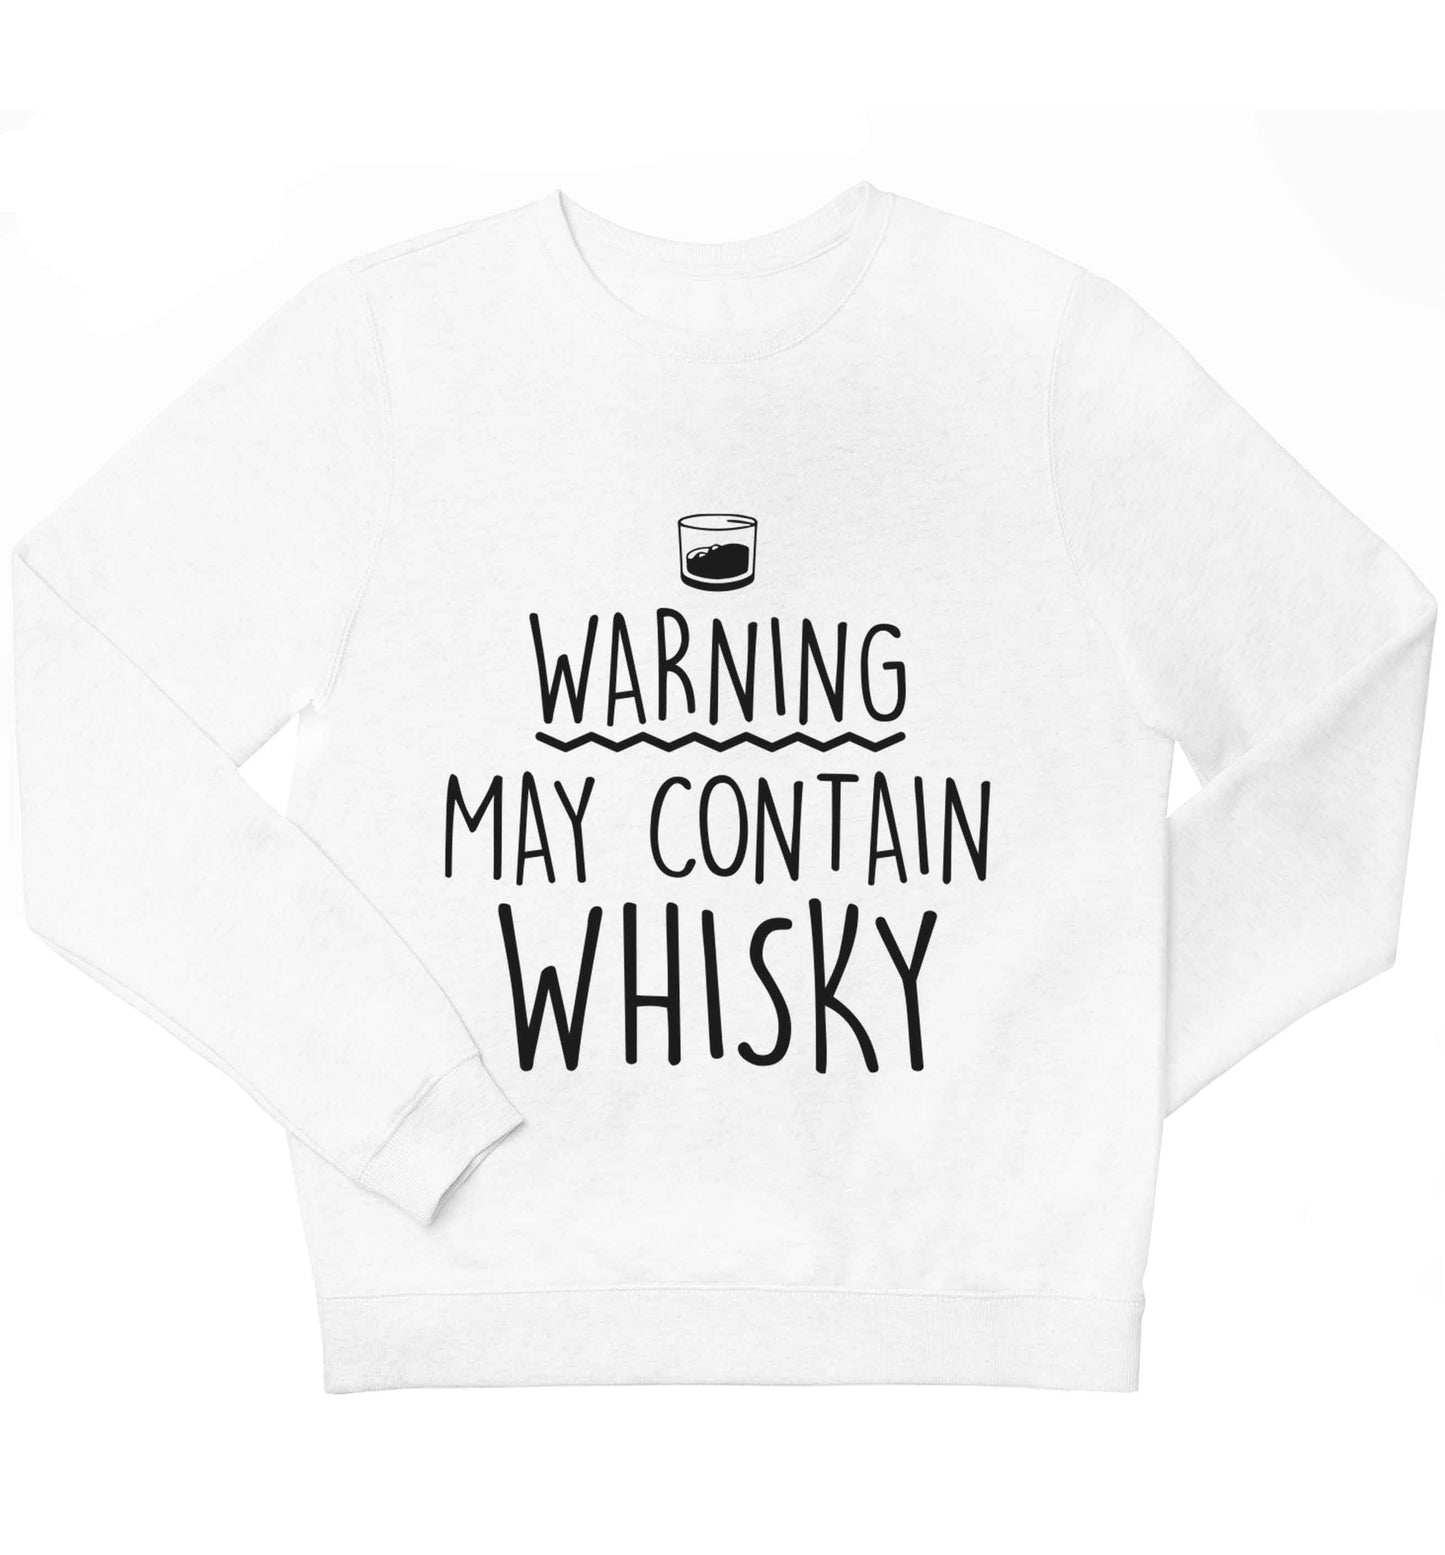 Warning may contain whisky adult's unisex pink sweater 2XL